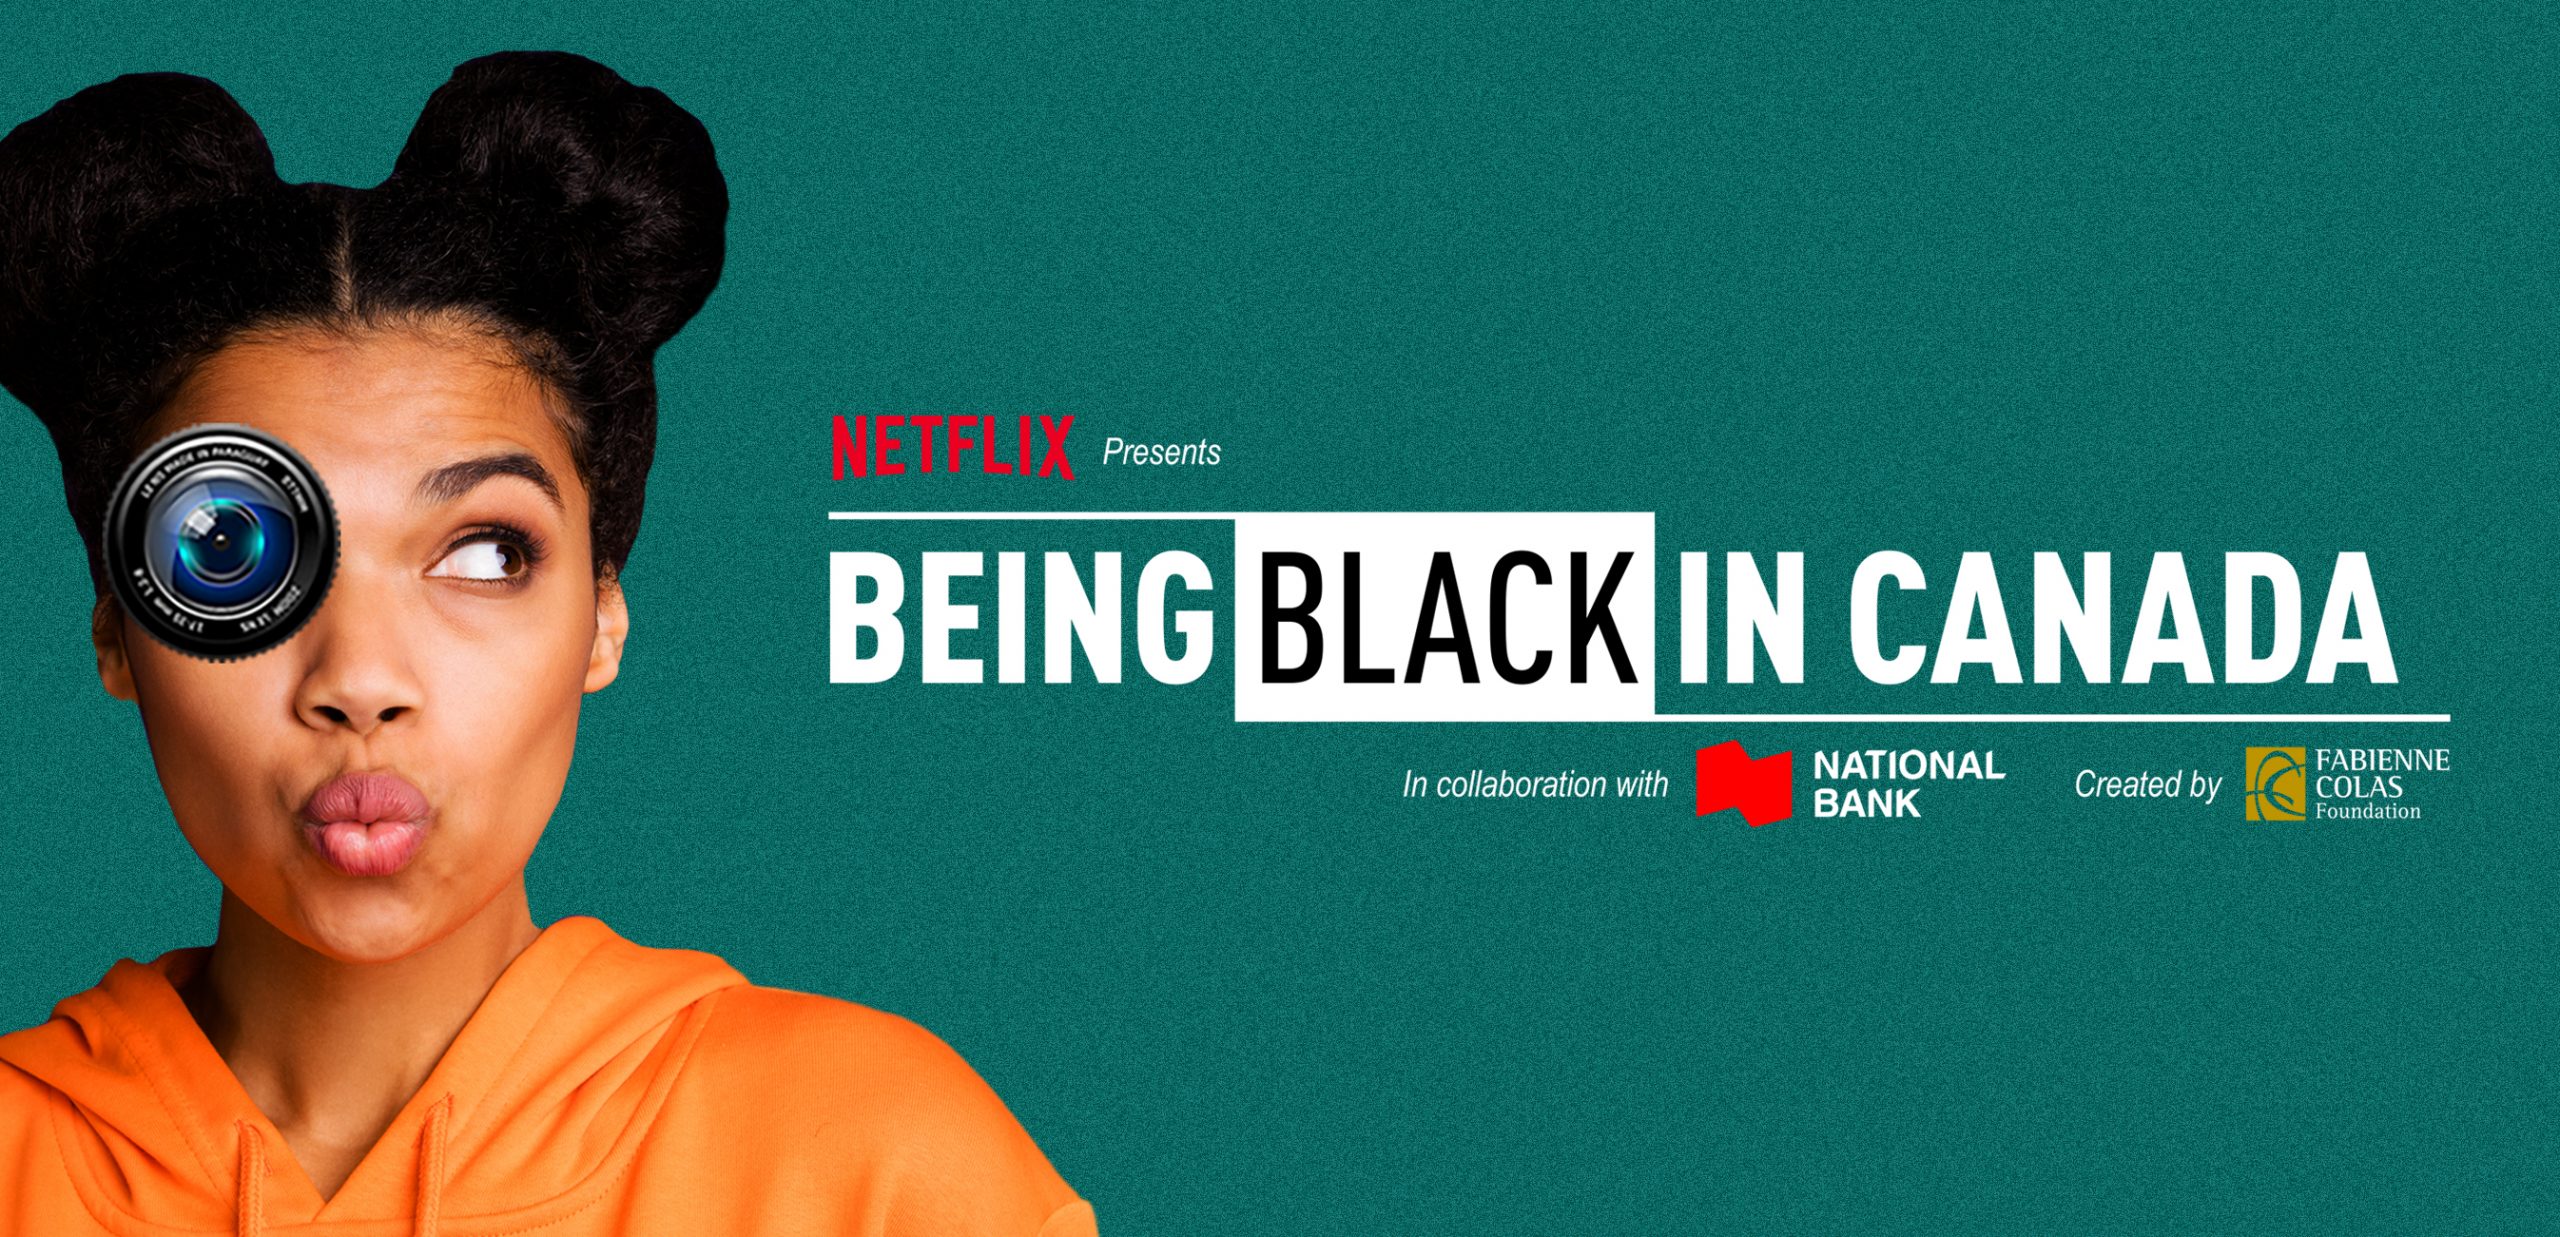 CALL FOR APPLICATIONS Fabienne Colas Foundation’s BEING BLACK IN CANADA Presented by Netflix in collaboration with the National Bank  Montreal, Toronto, Halifax, Calgary, Vancouver, Ottawa